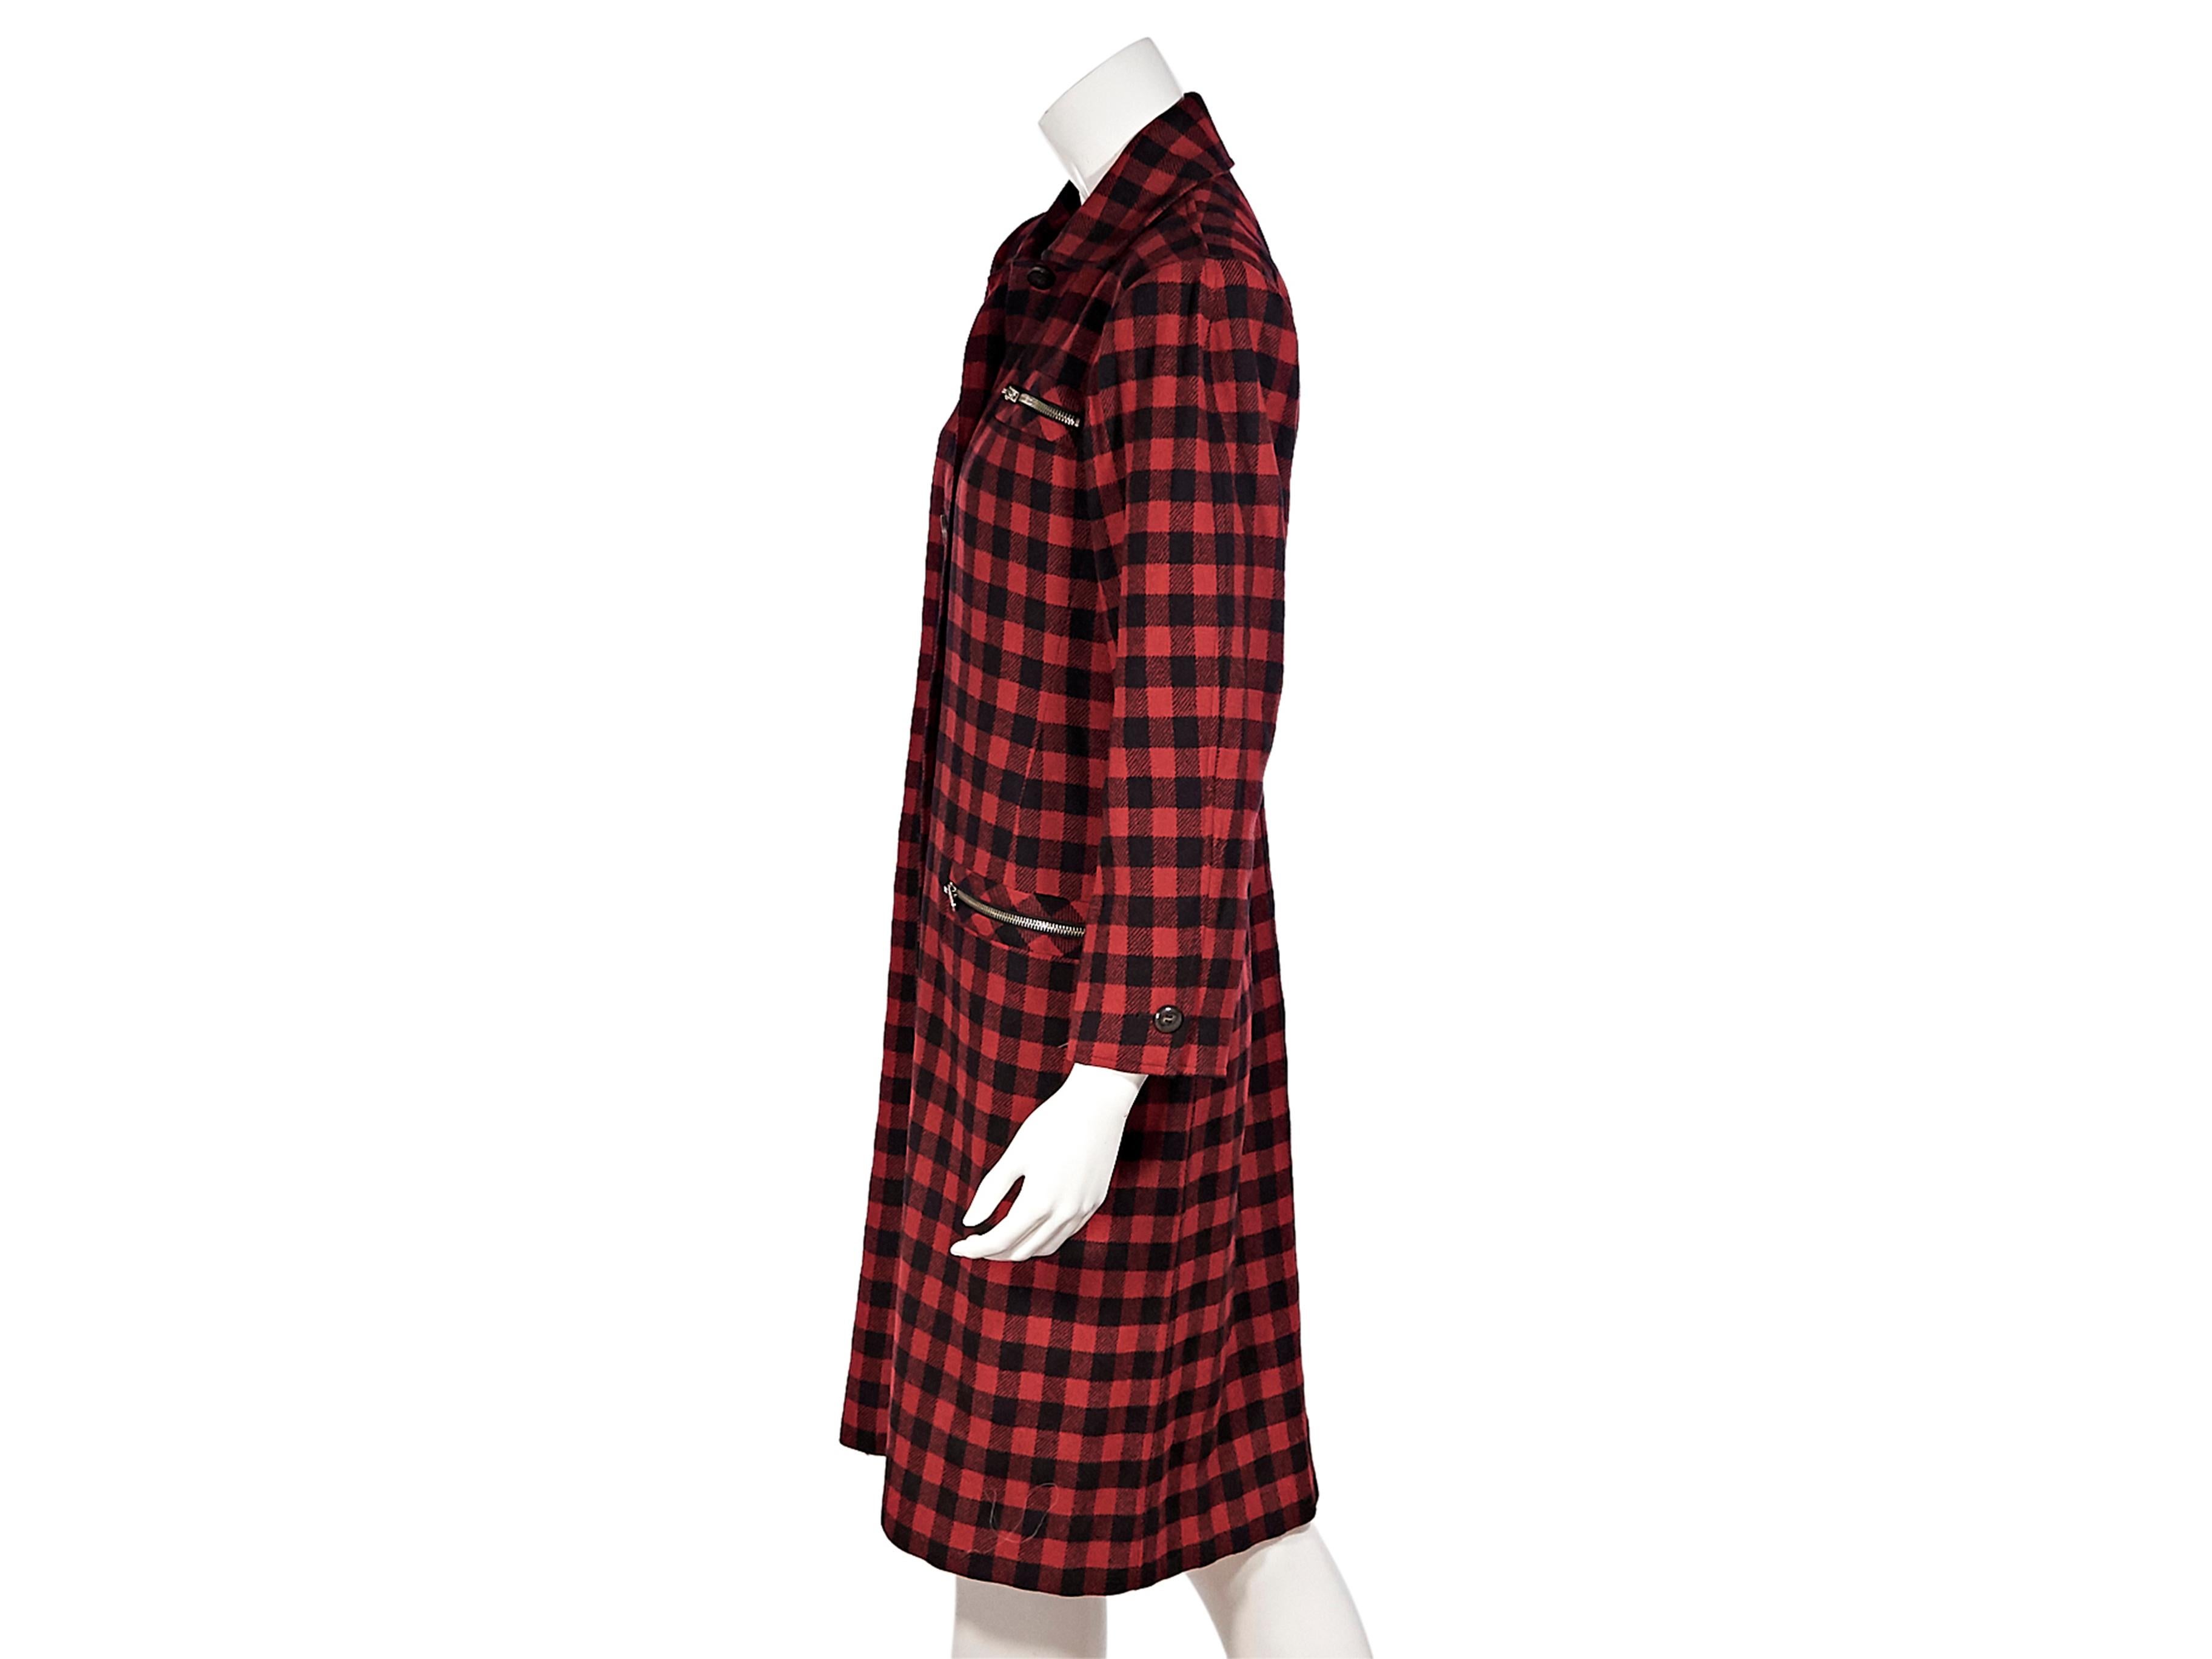 Product details:  Vintage red and black checkered wool jacket by Yves Saint Laurent Variation. Pointed collar. Long sleeves. Two zip pockets at sides. Single zip pocket at chest. Button-front closures. Silver-tone hardware. Knee-length. Style yours